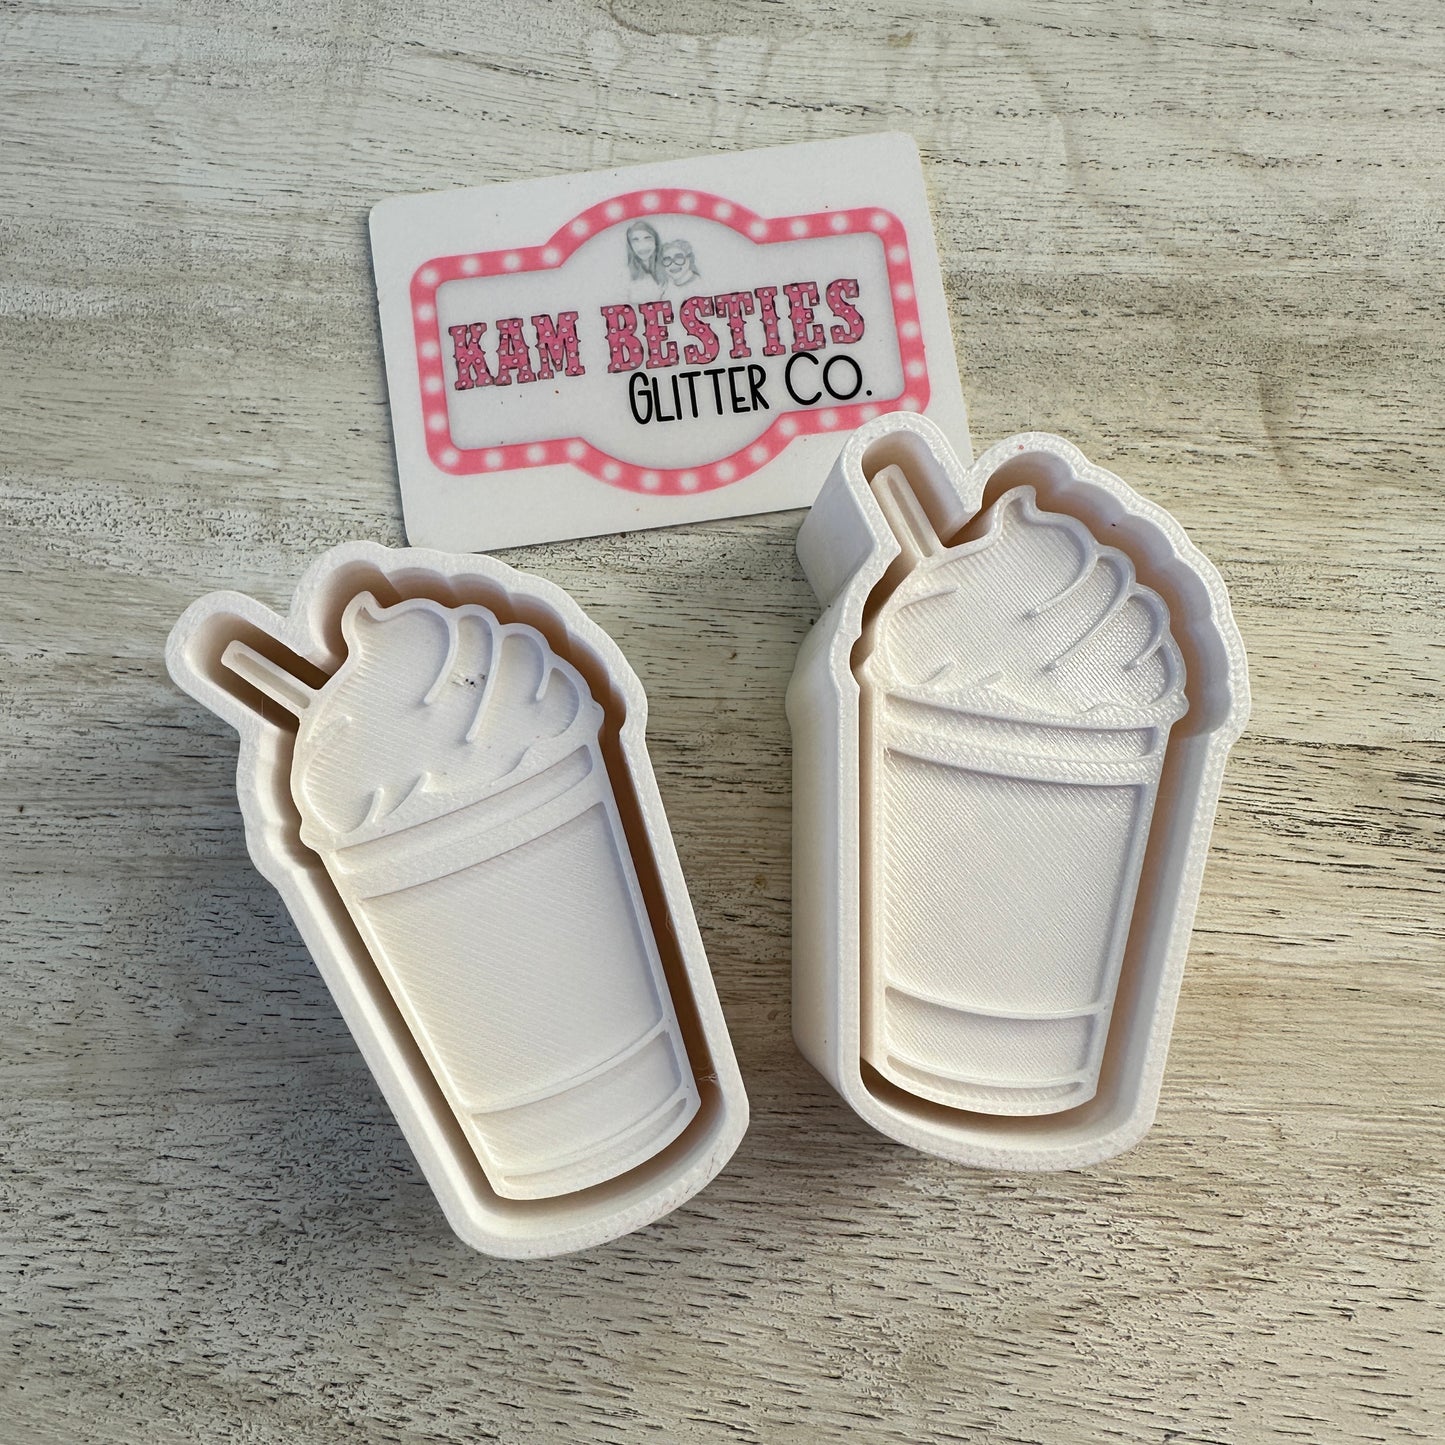 Iced coffee freshie mold vent size